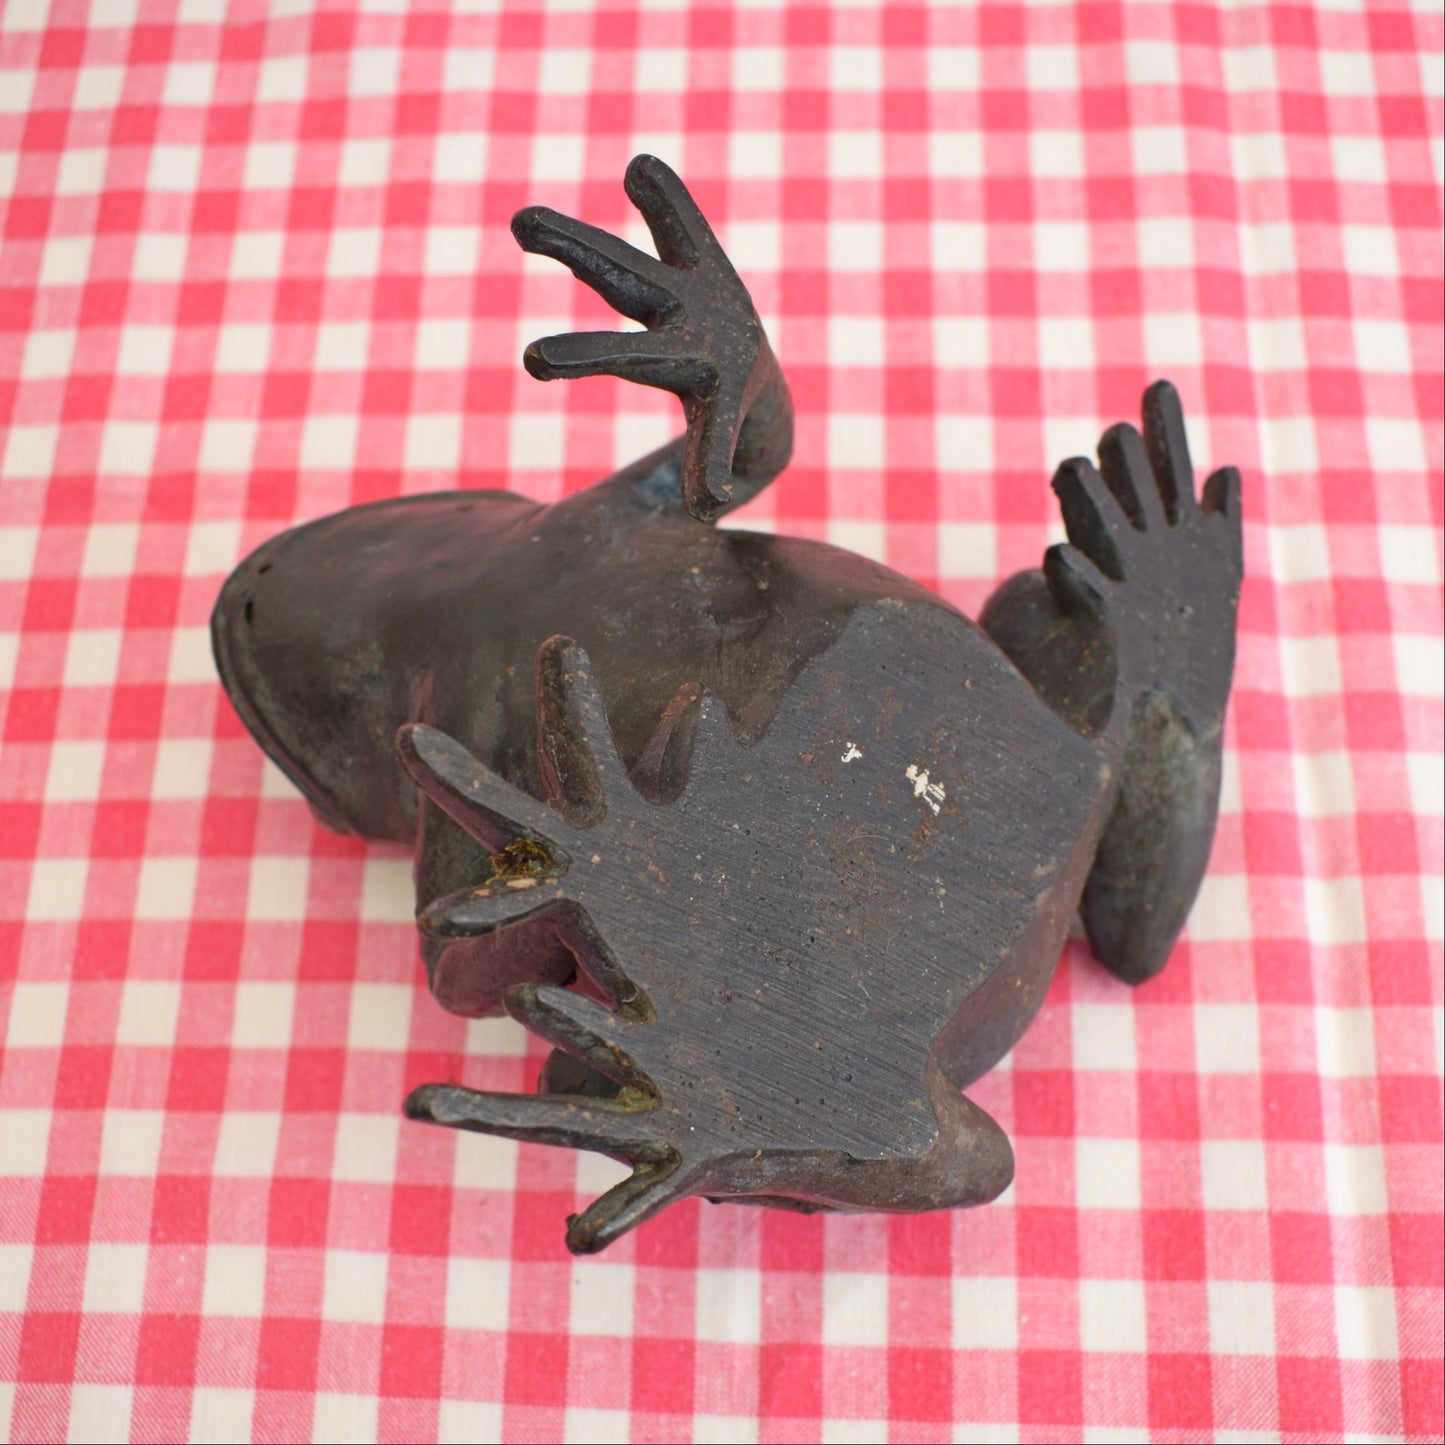 Vintage Realistic Toad / Frog Figure - Life Size